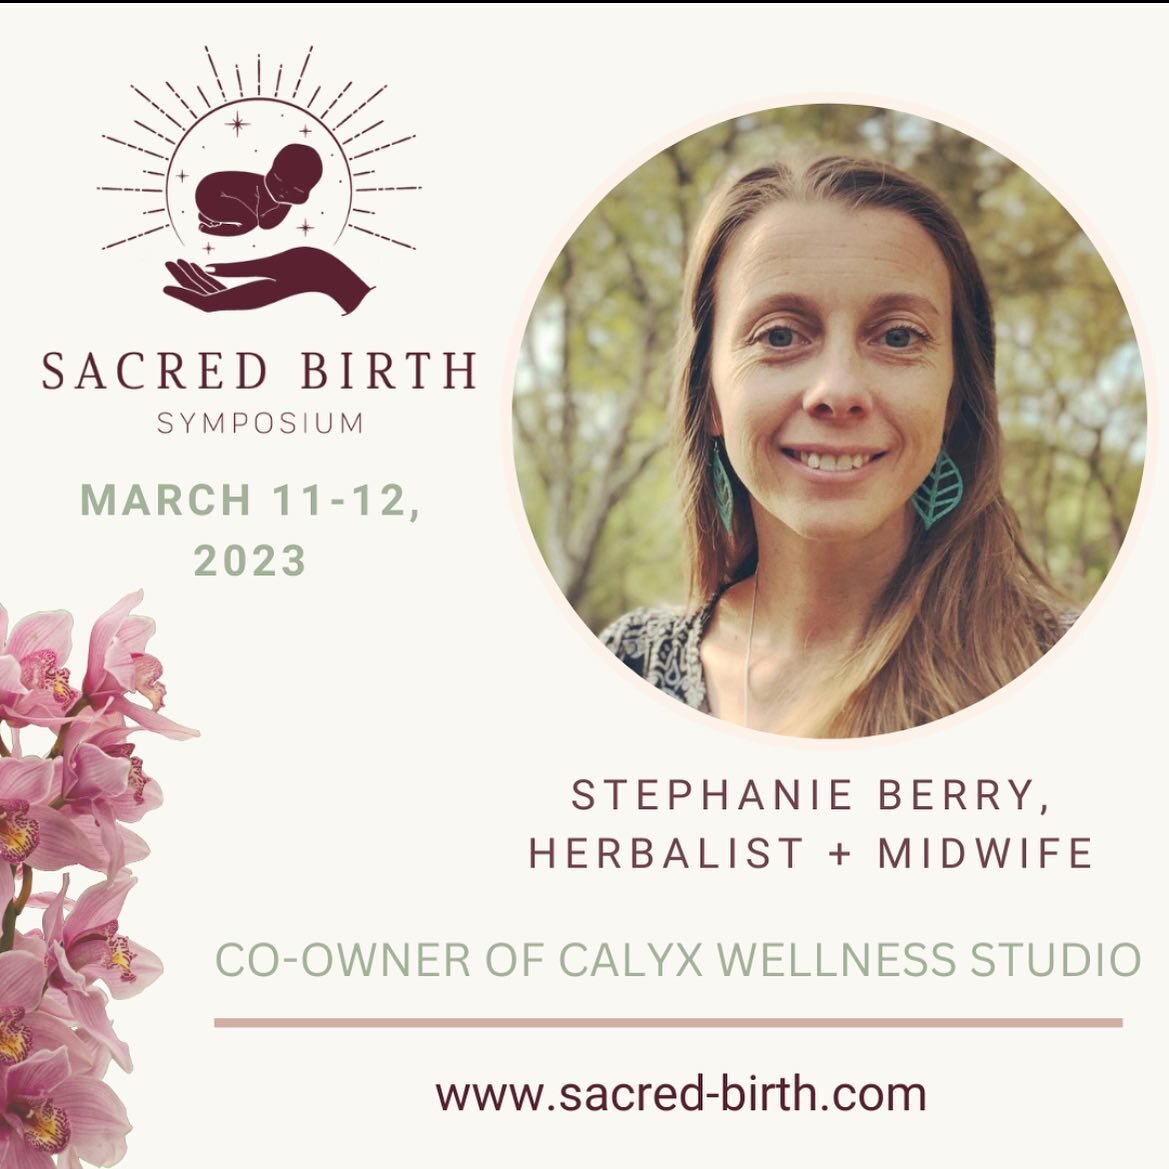 Maybe you&rsquo;ve heard about Sacred Birth☀️

I&rsquo;m excited to be apart of this group that&rsquo;s talking about moving outside of medical management of pregnancy and birth to empower women and families with knowledge. 

Here&rsquo;s the details